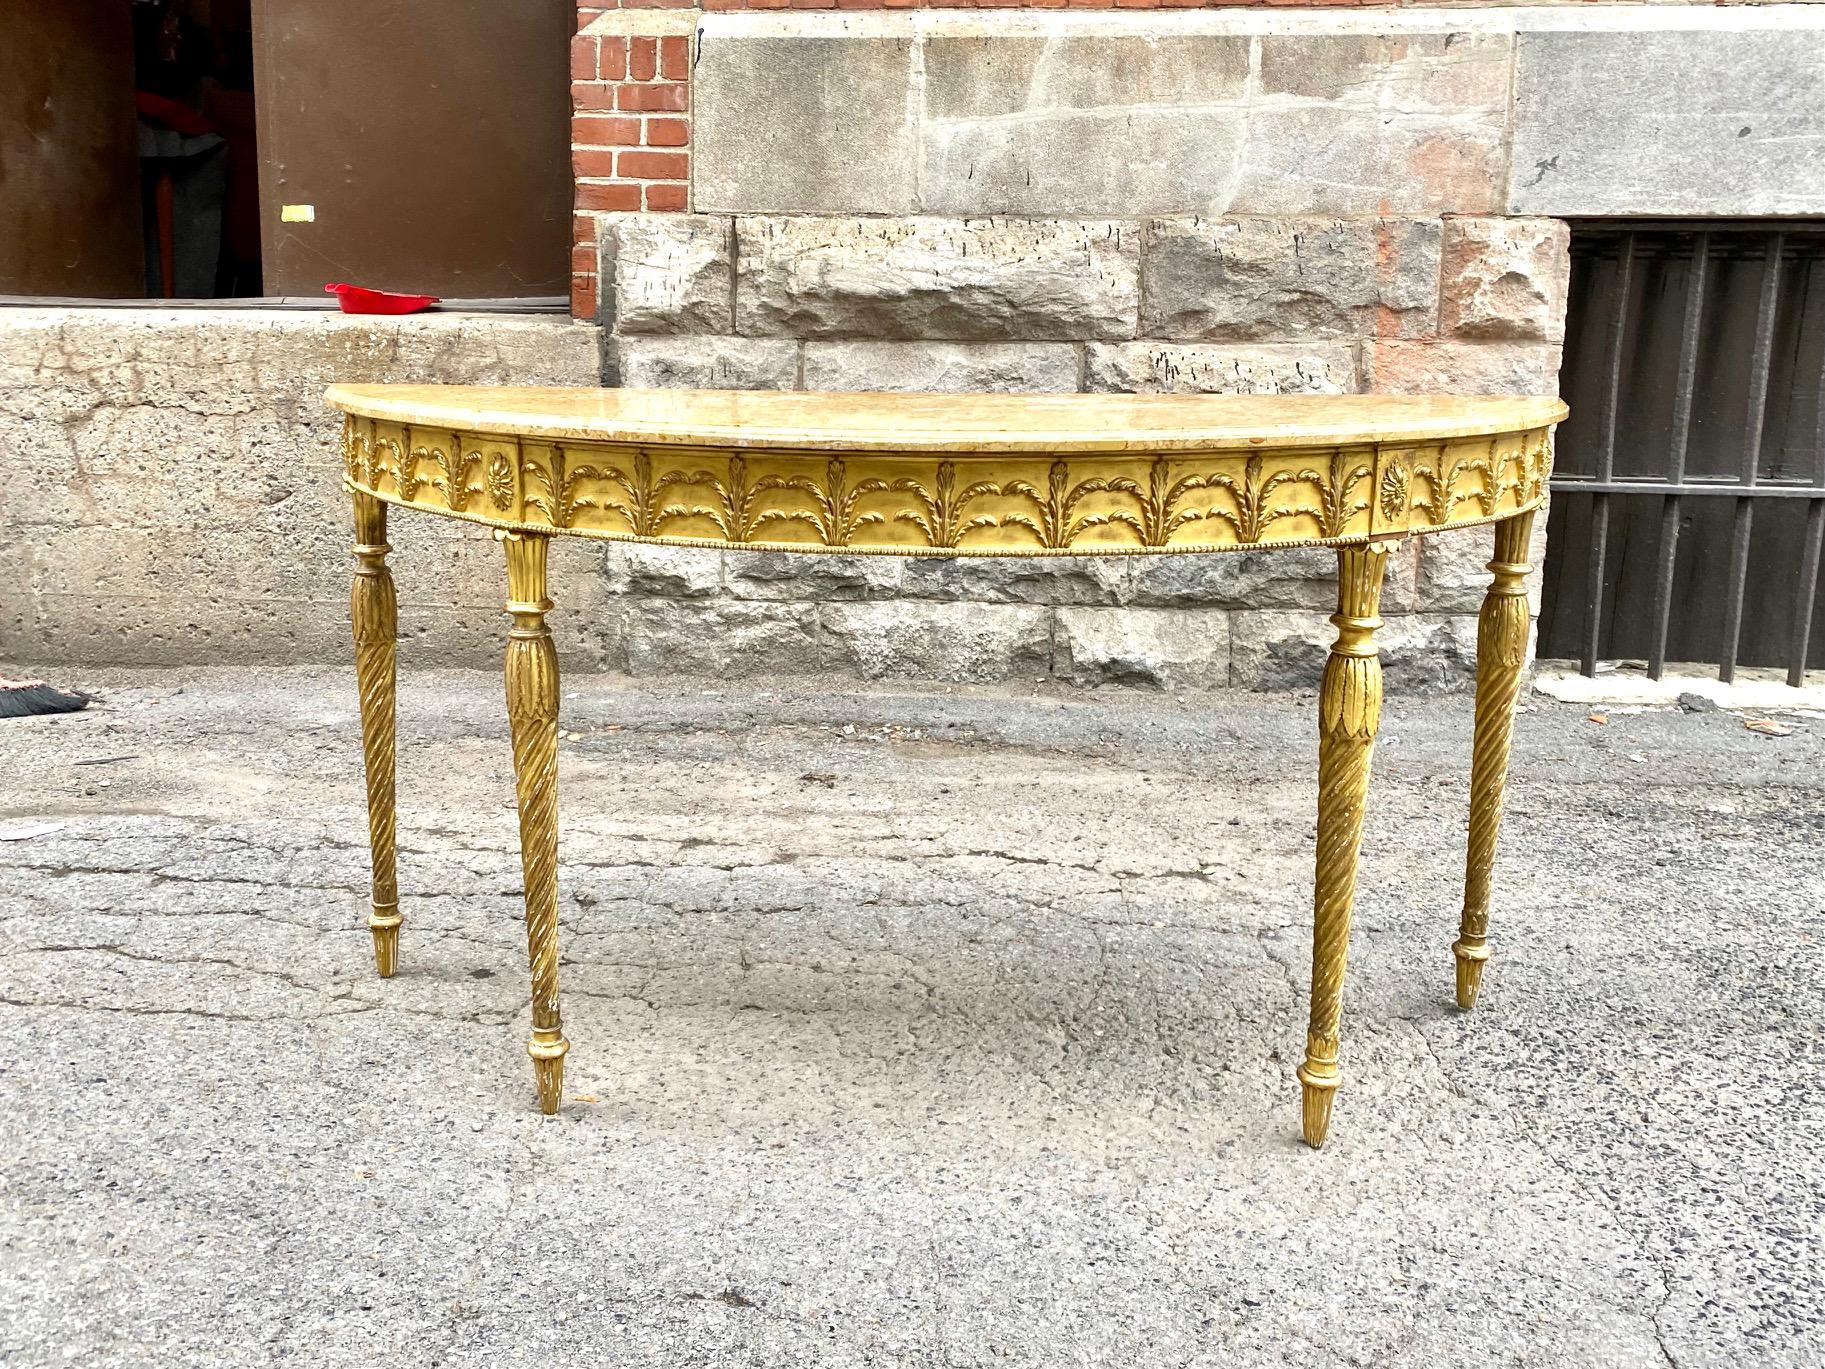 Rare Gilt wood Adam Period Demi Lune console table with Sienna Marble Top
Bearing the Tag Archer Cowley & Co Oxford.